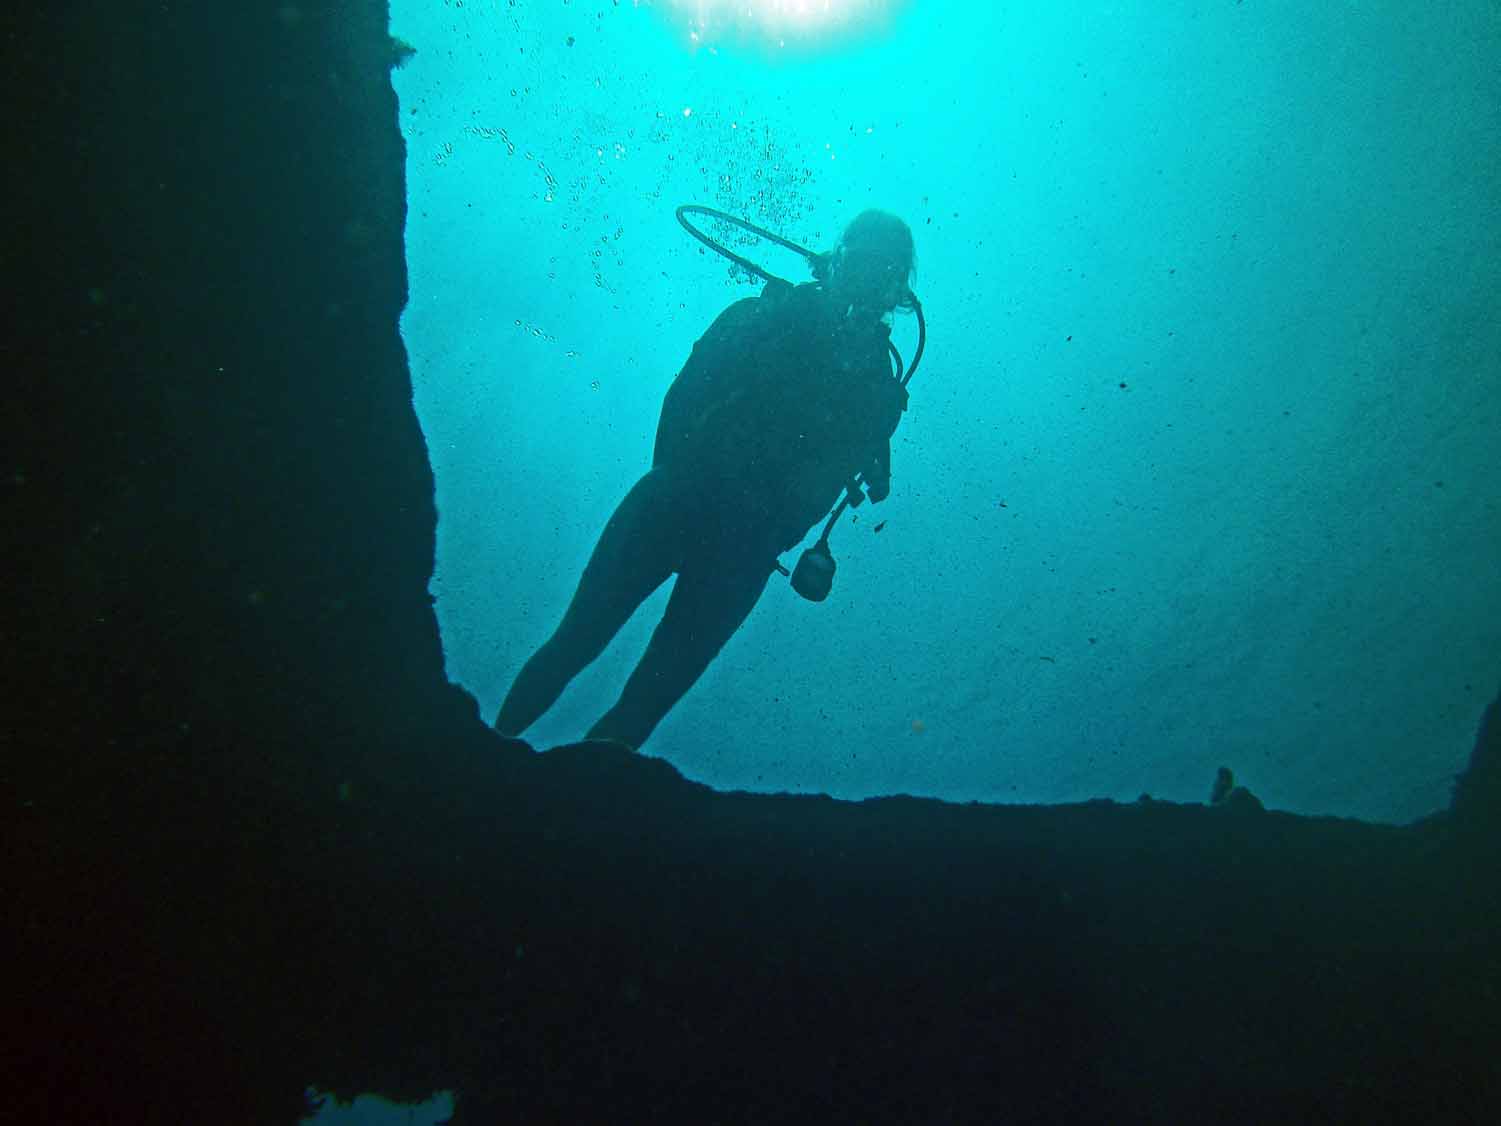 From the Prince Albert wreck